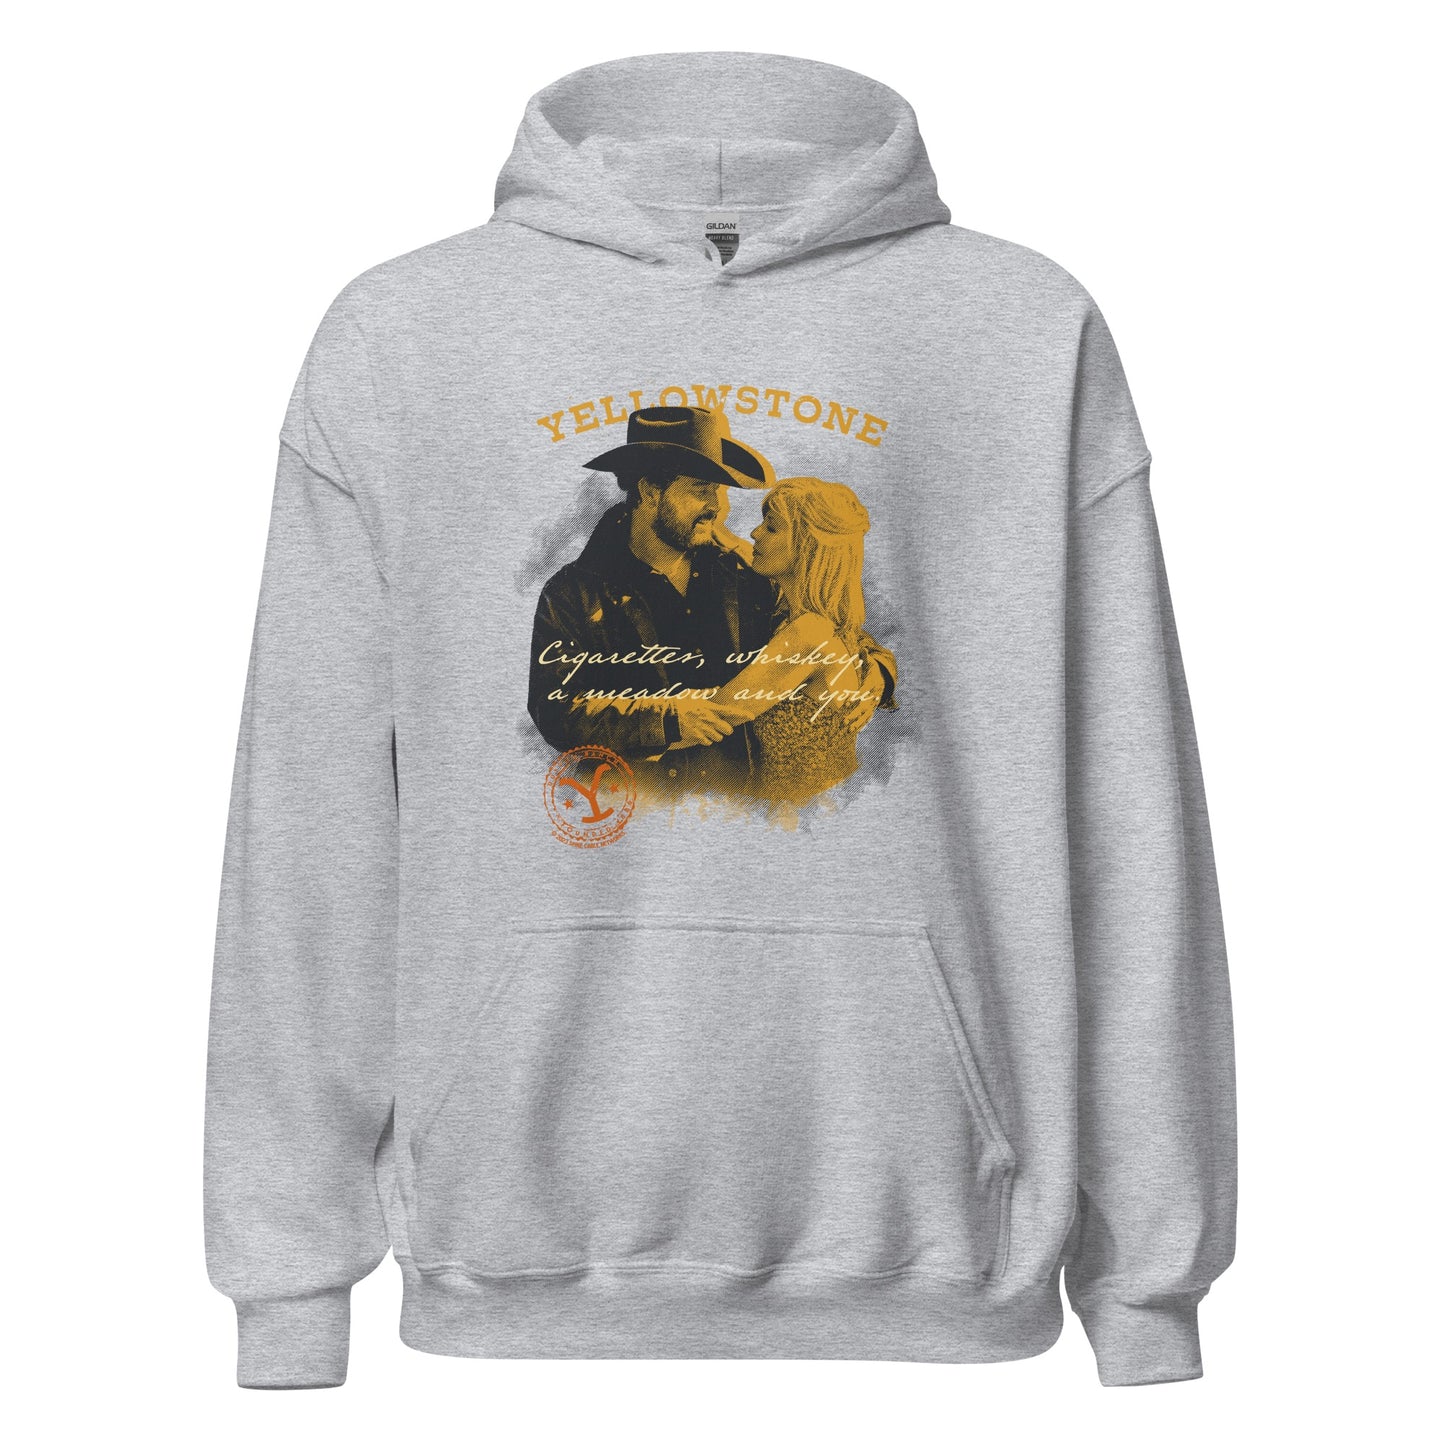 Yellowstone Cigarettes Whiskey and You Sweatshirt à capuche